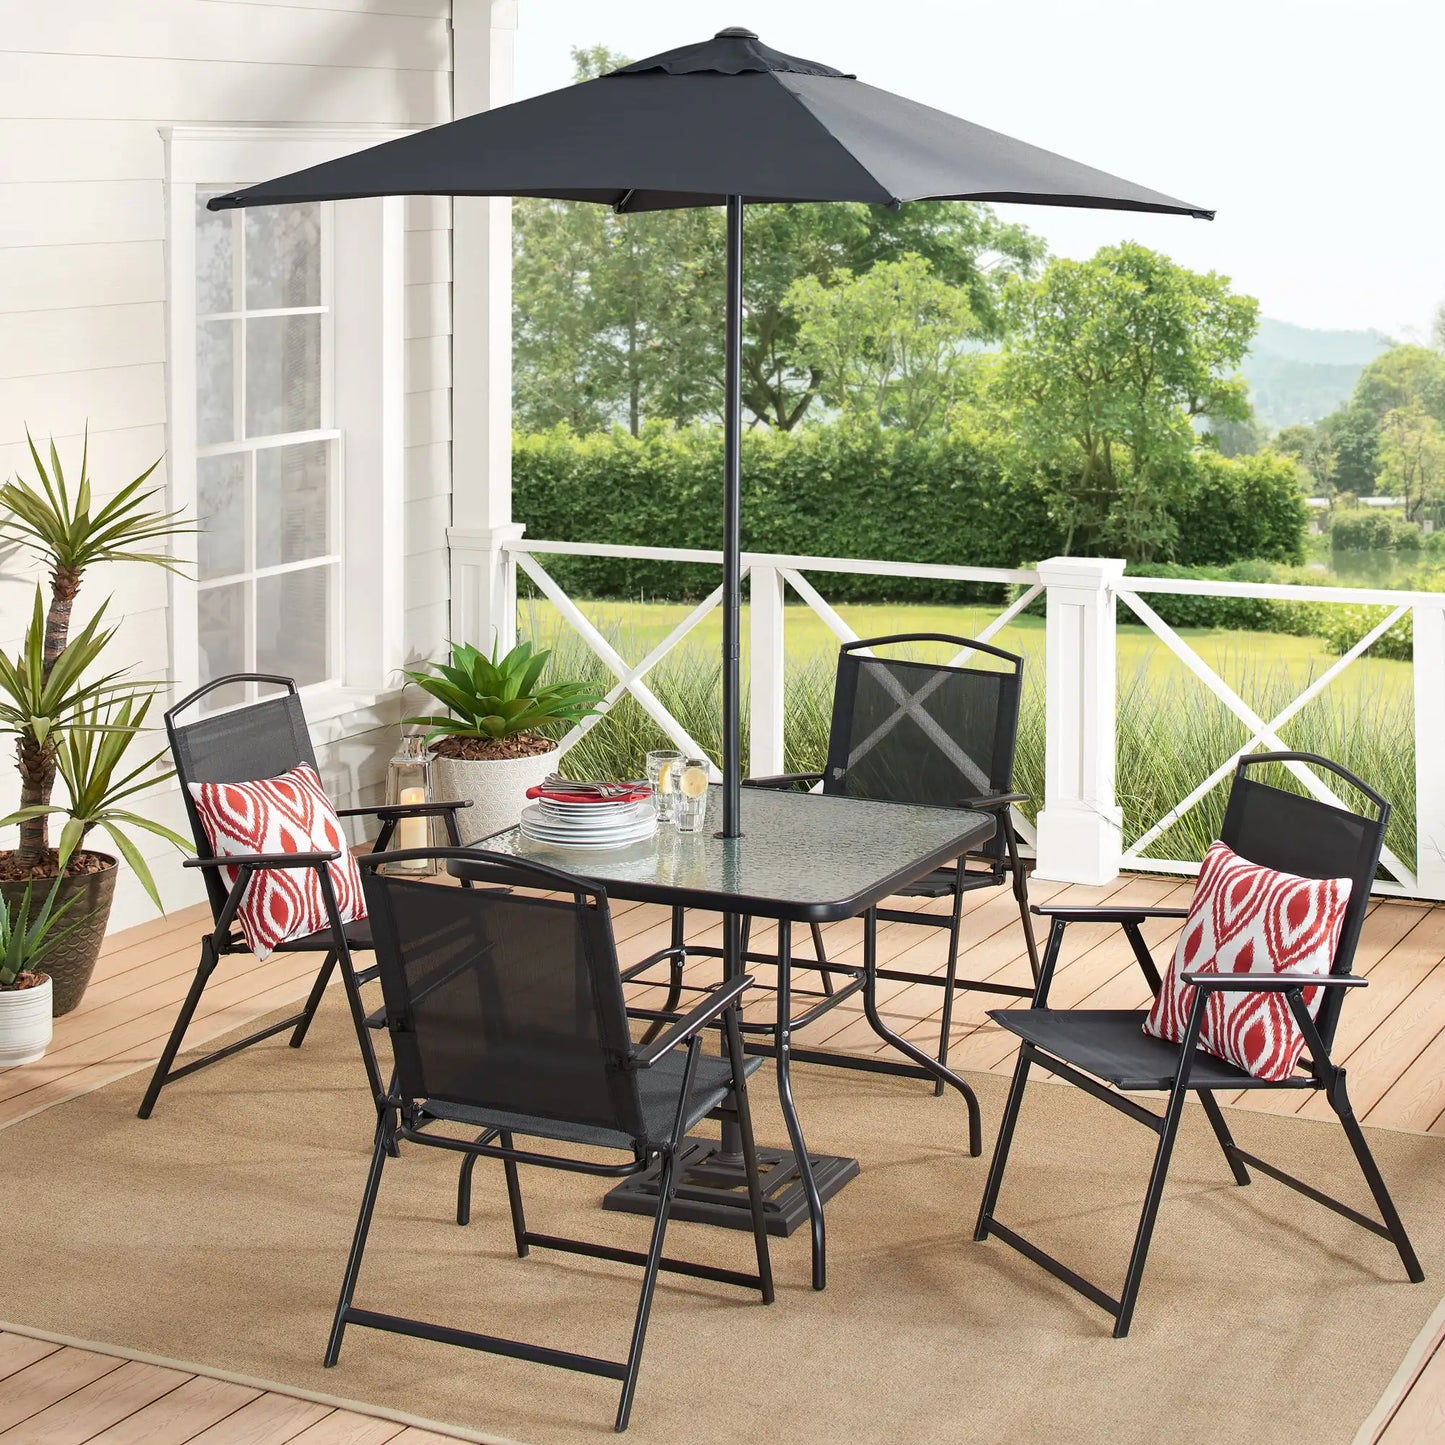 6 Piece Outdoor patio furniture with 4 chairs, and a table umbrella. - My Store